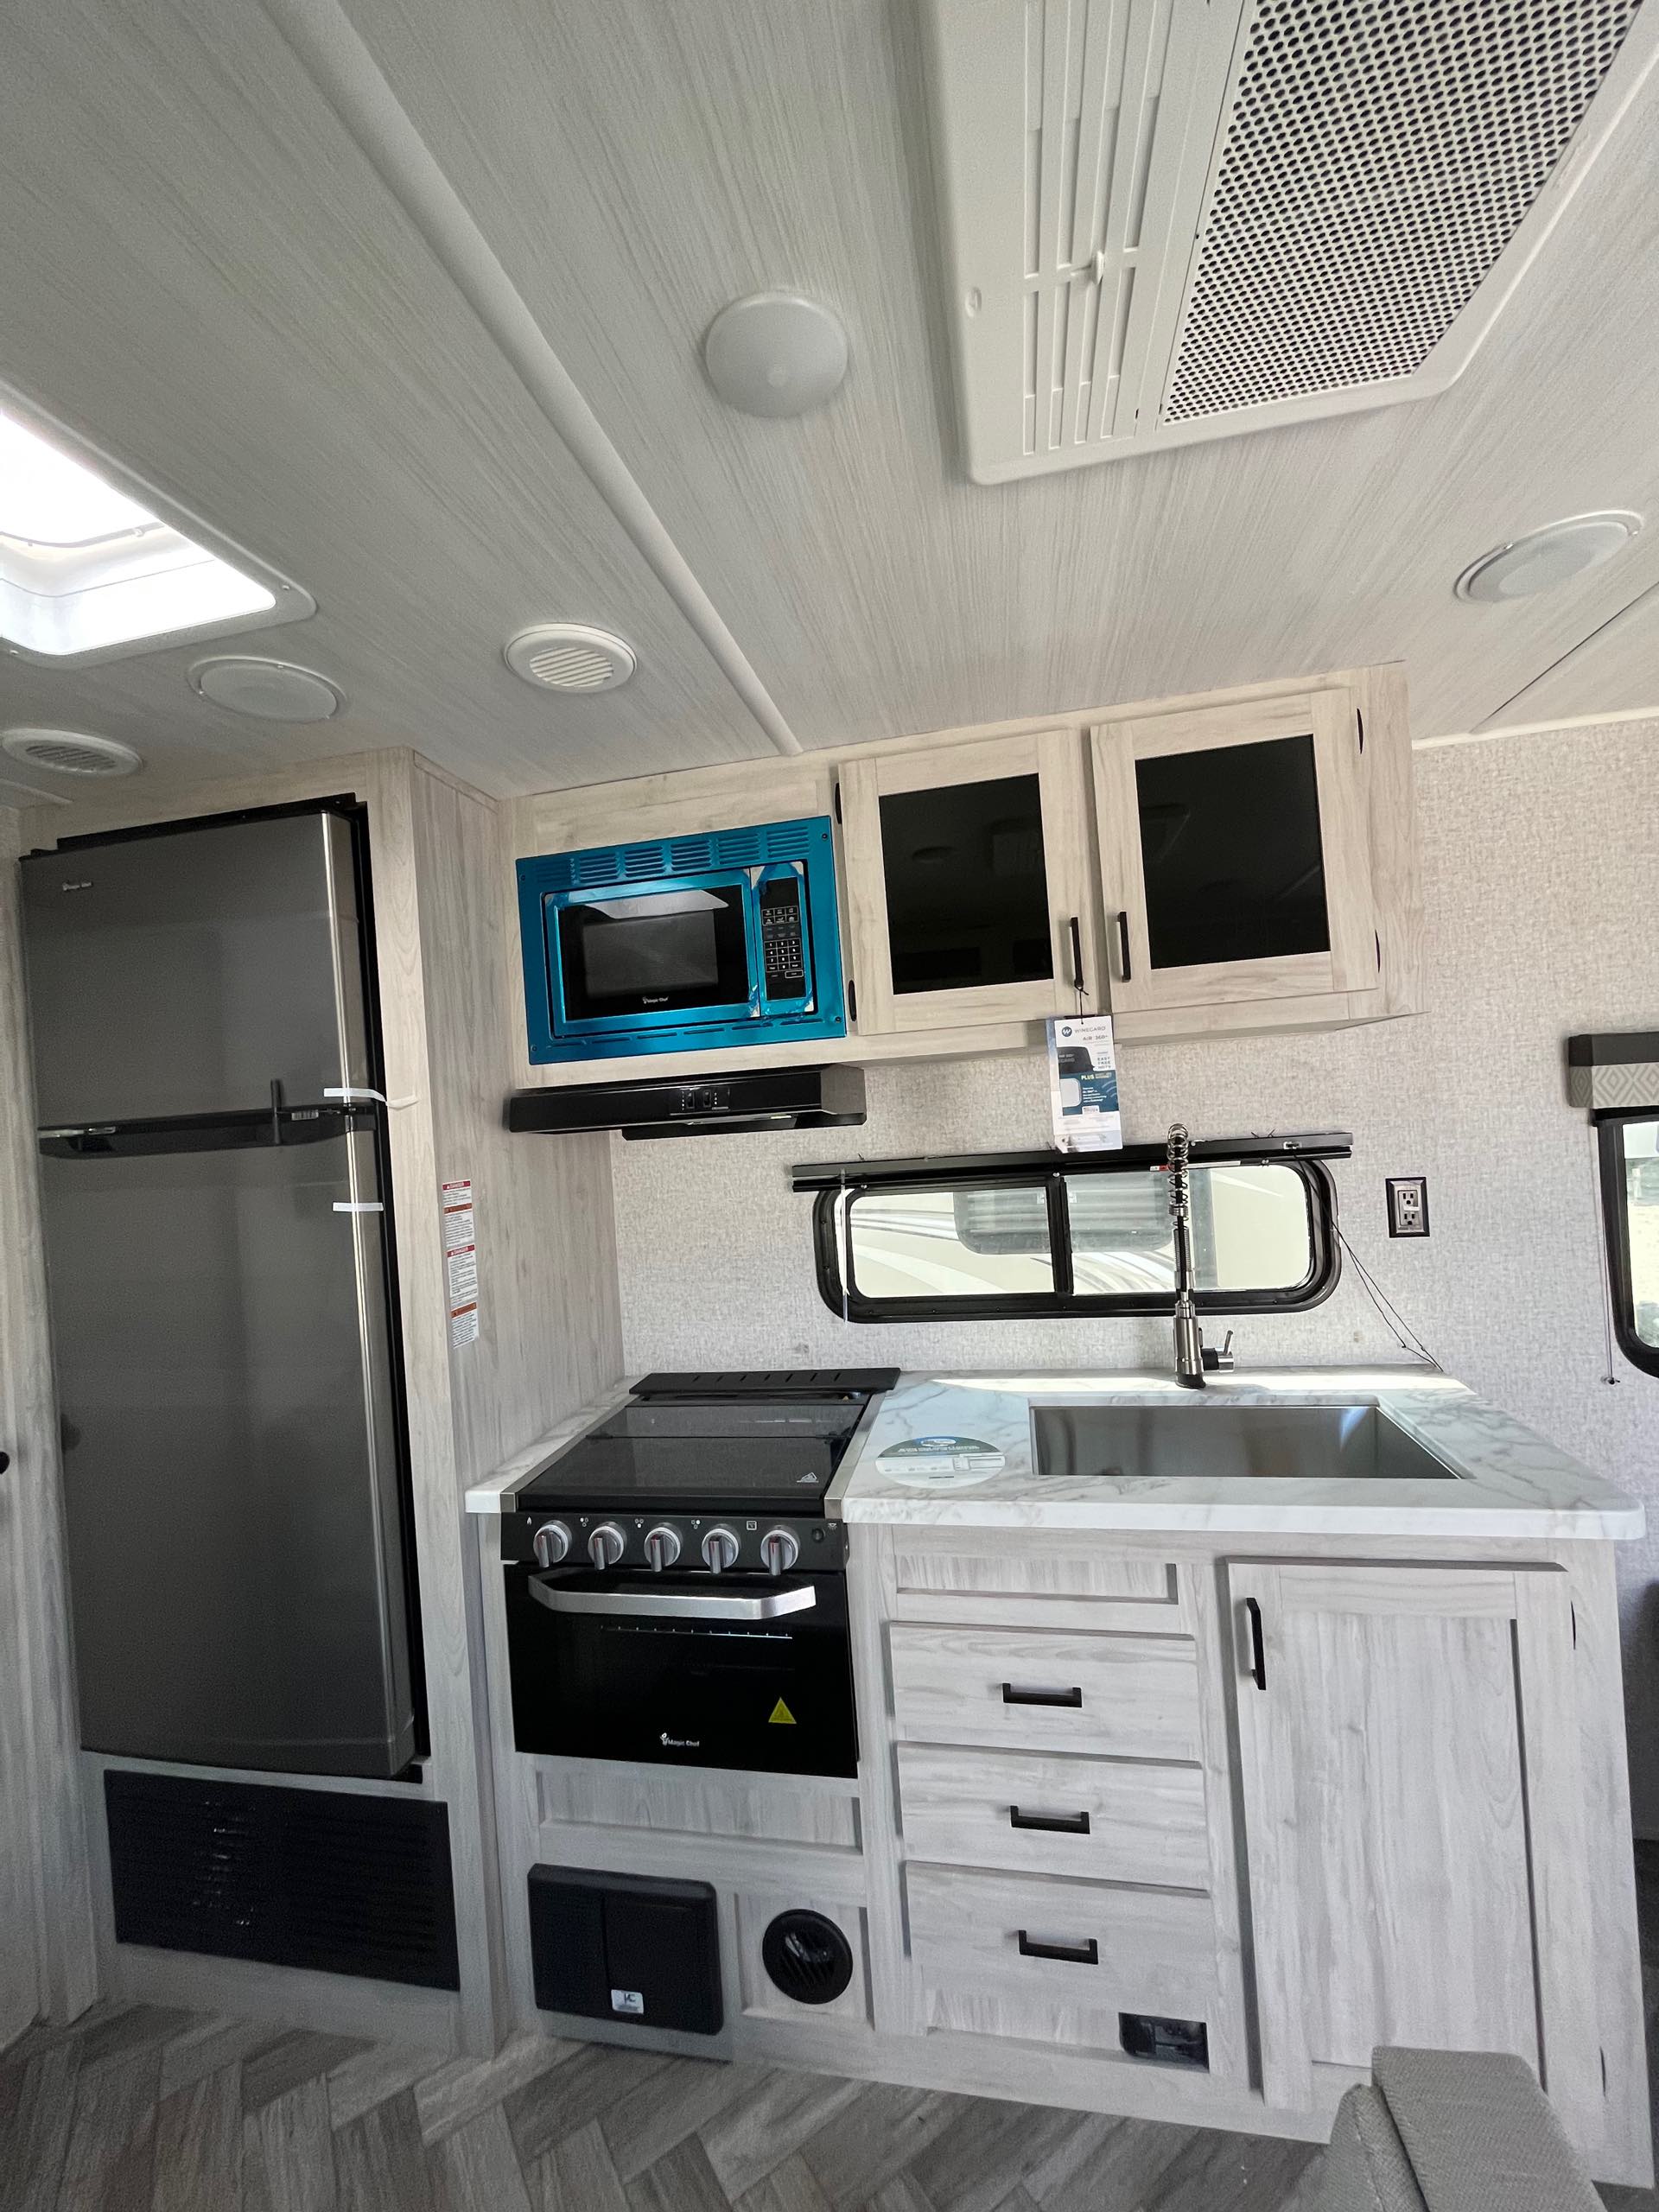 2023 EAST TO WEST DELLA TERRA at Prosser's Premium RV Outlet